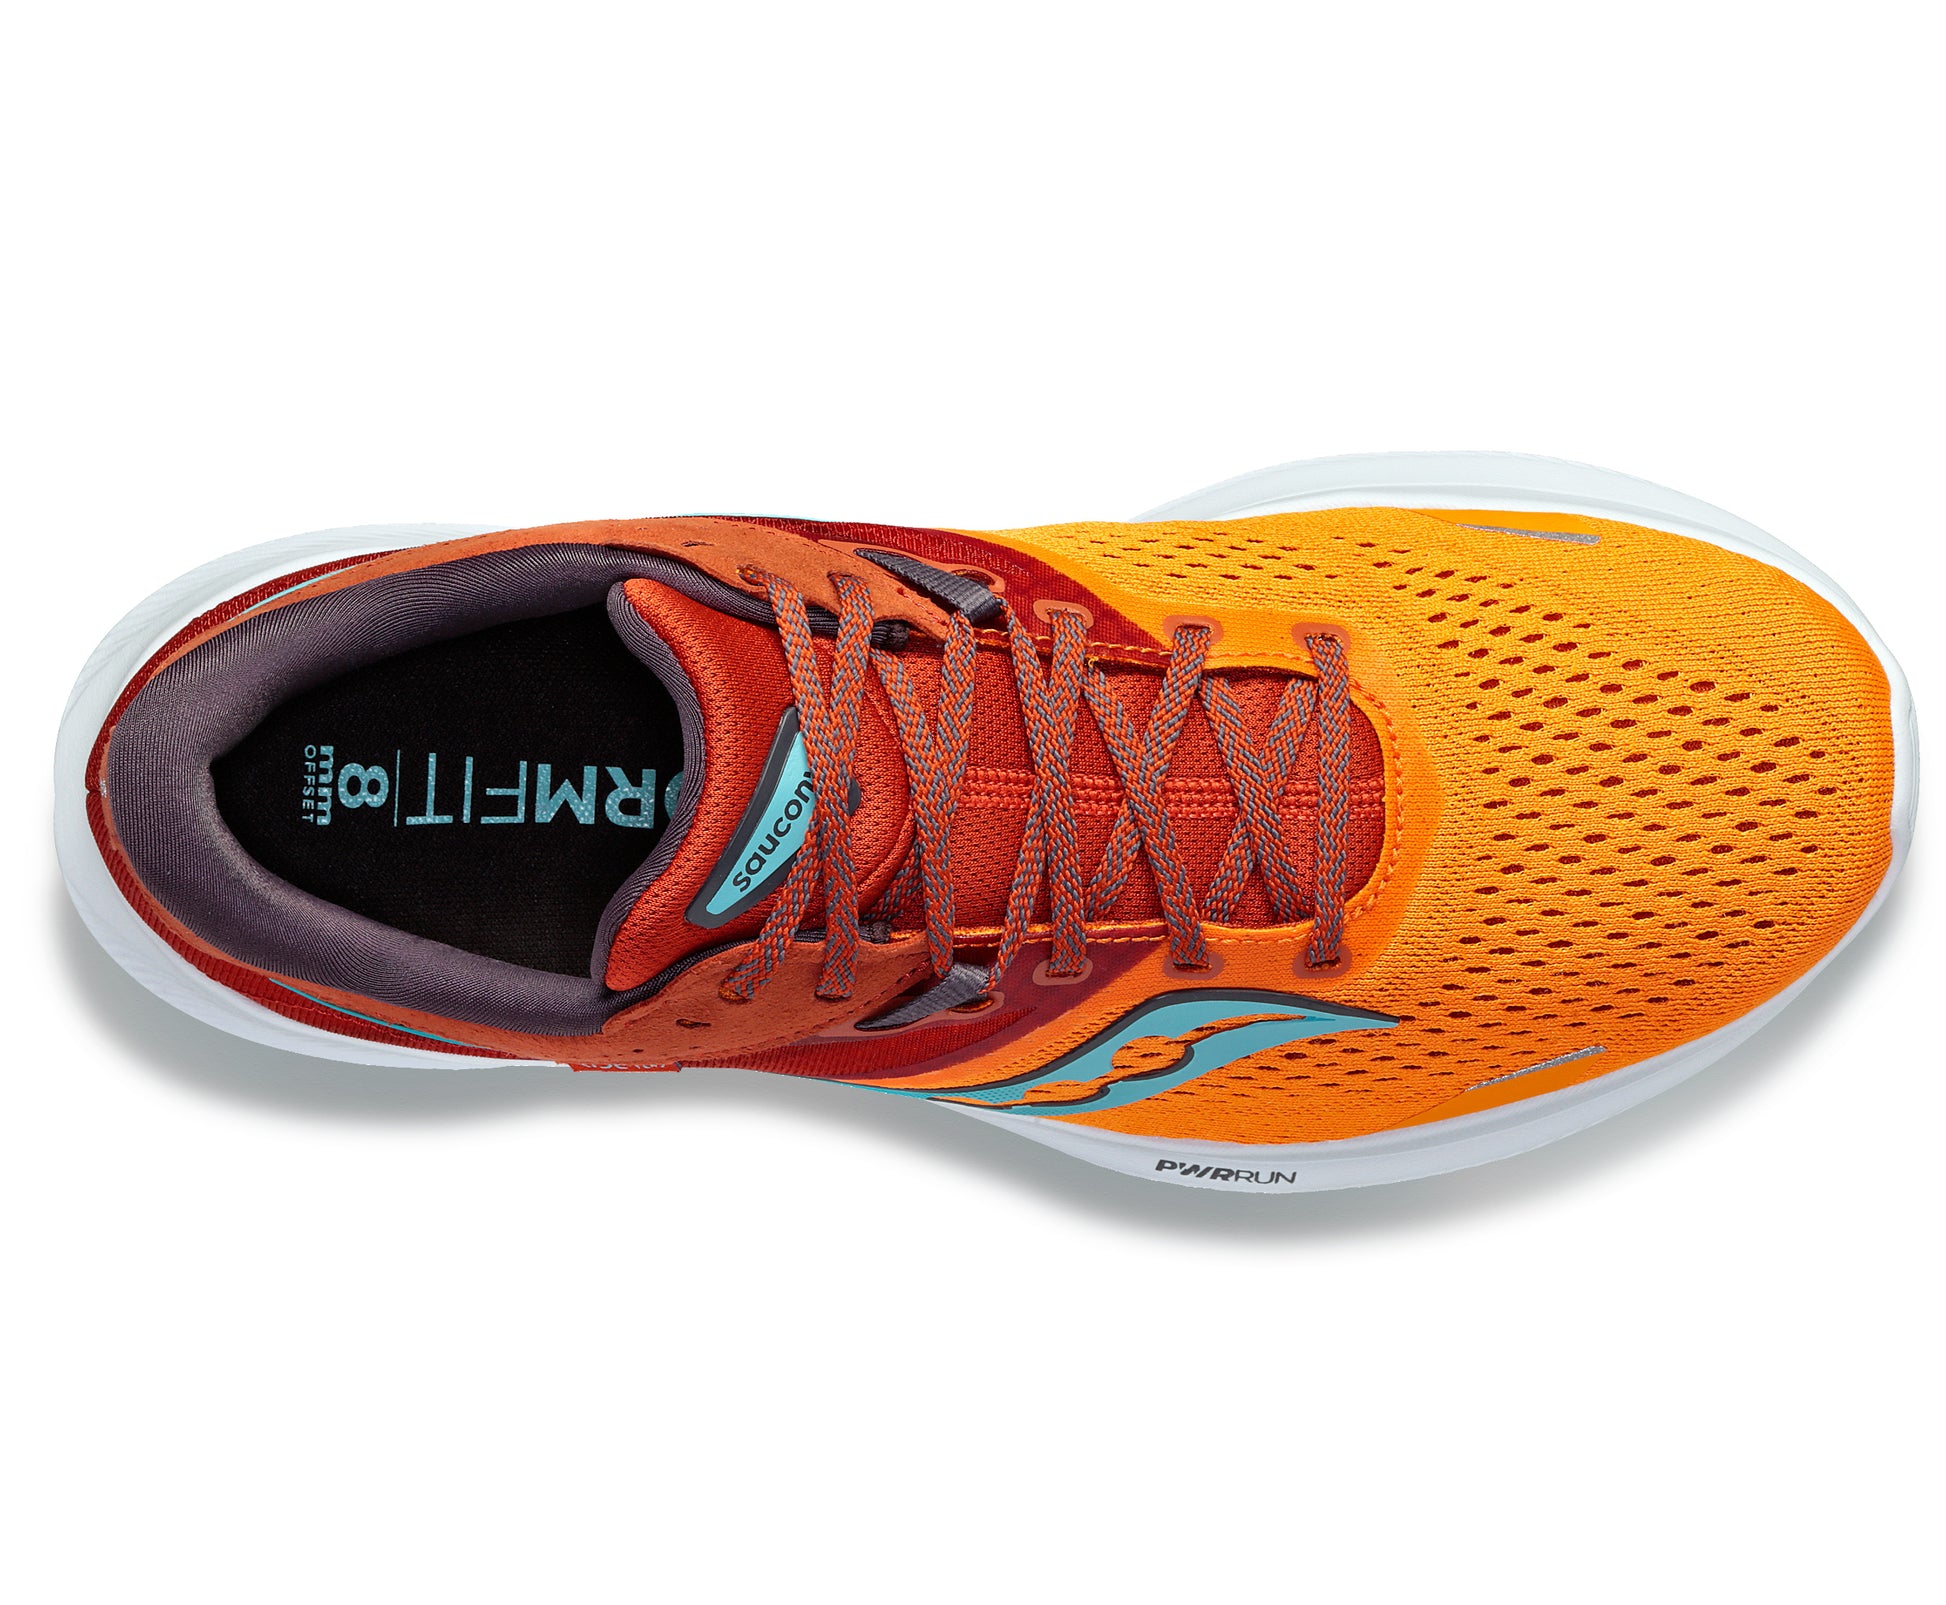 Saucony Ride 16 orange, red stable neutral running shoe